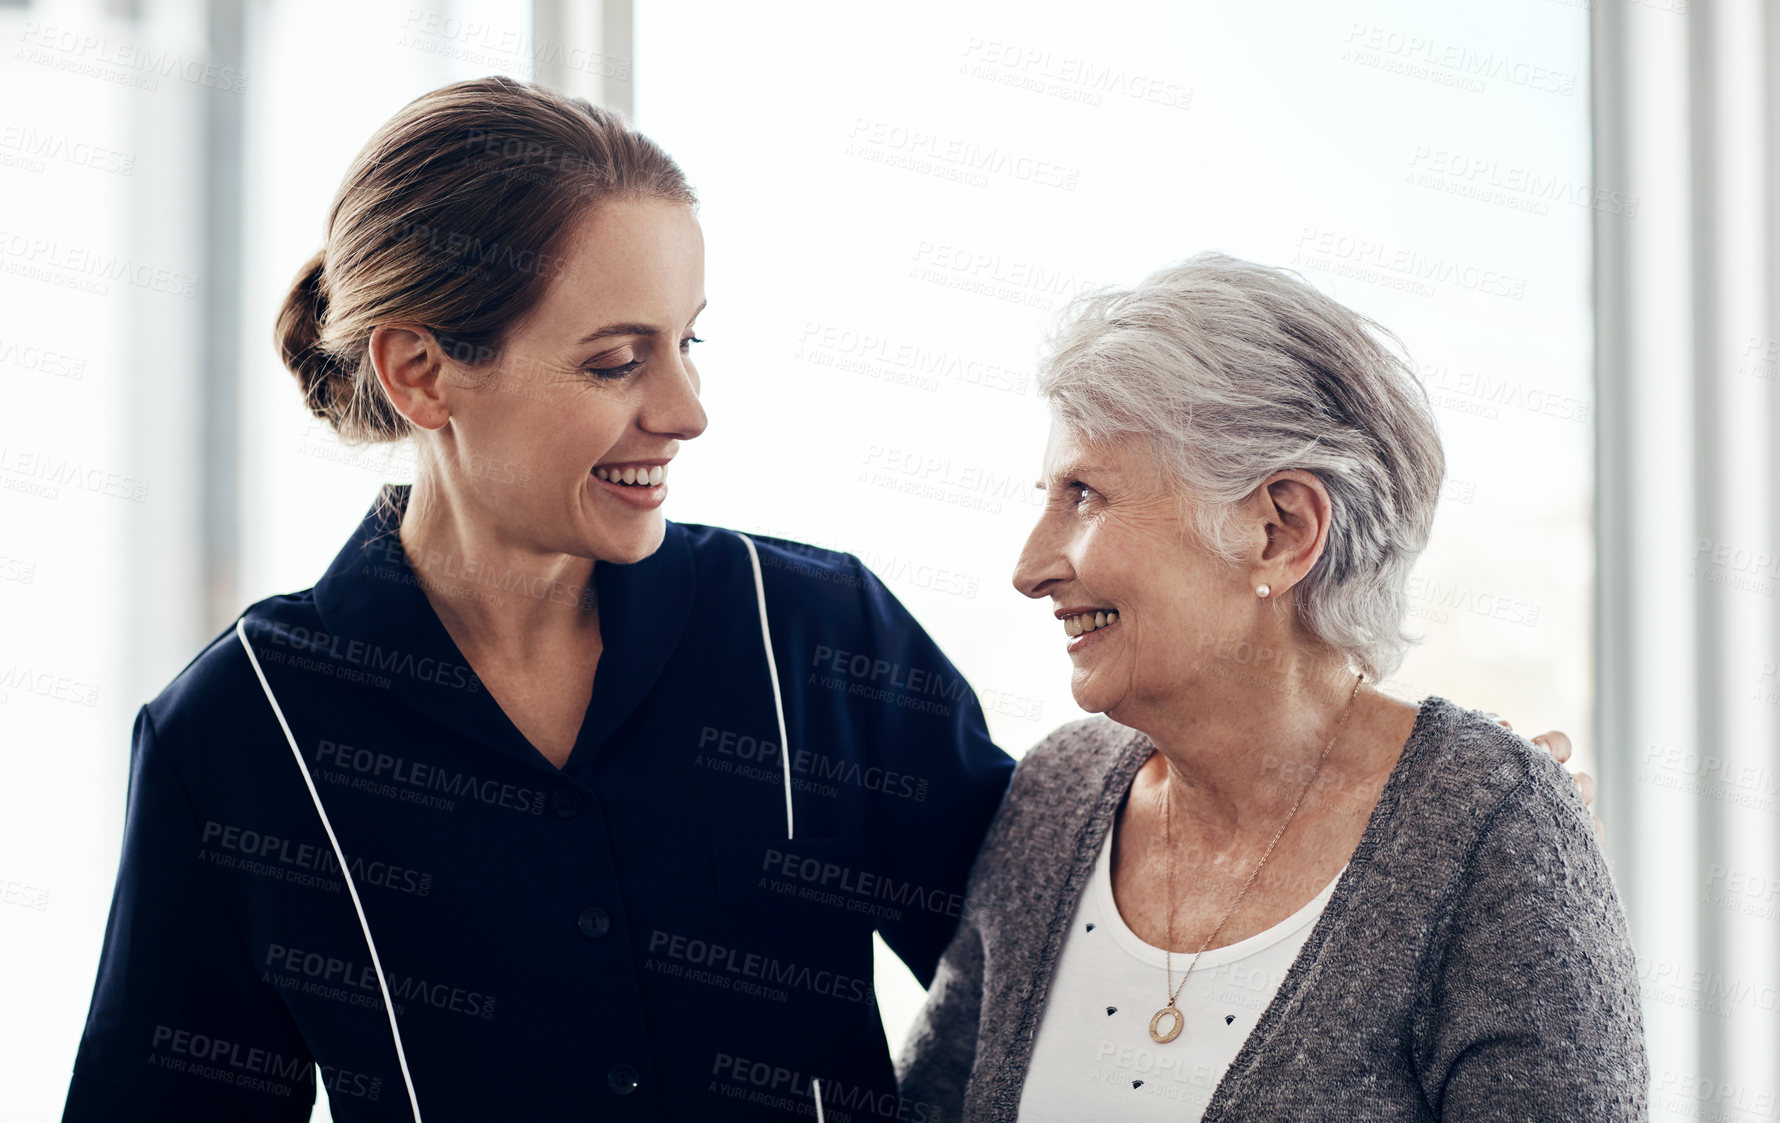 Buy stock photo Cropped shot of a female nurse caring for a senior woman